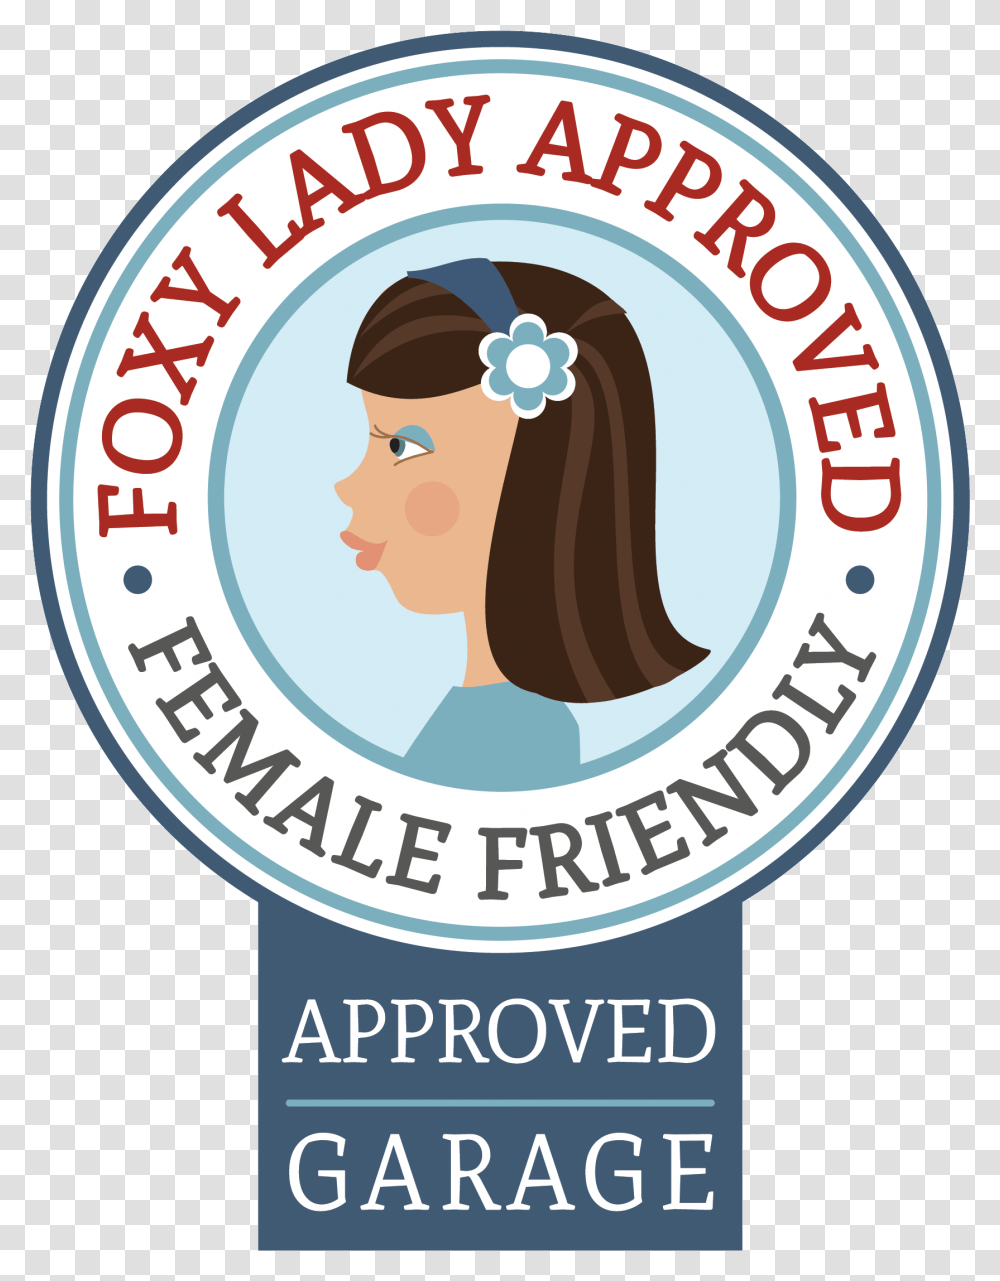 Image Result For Foxy Choice Female Friendly Garages, Label, Logo Transparent Png